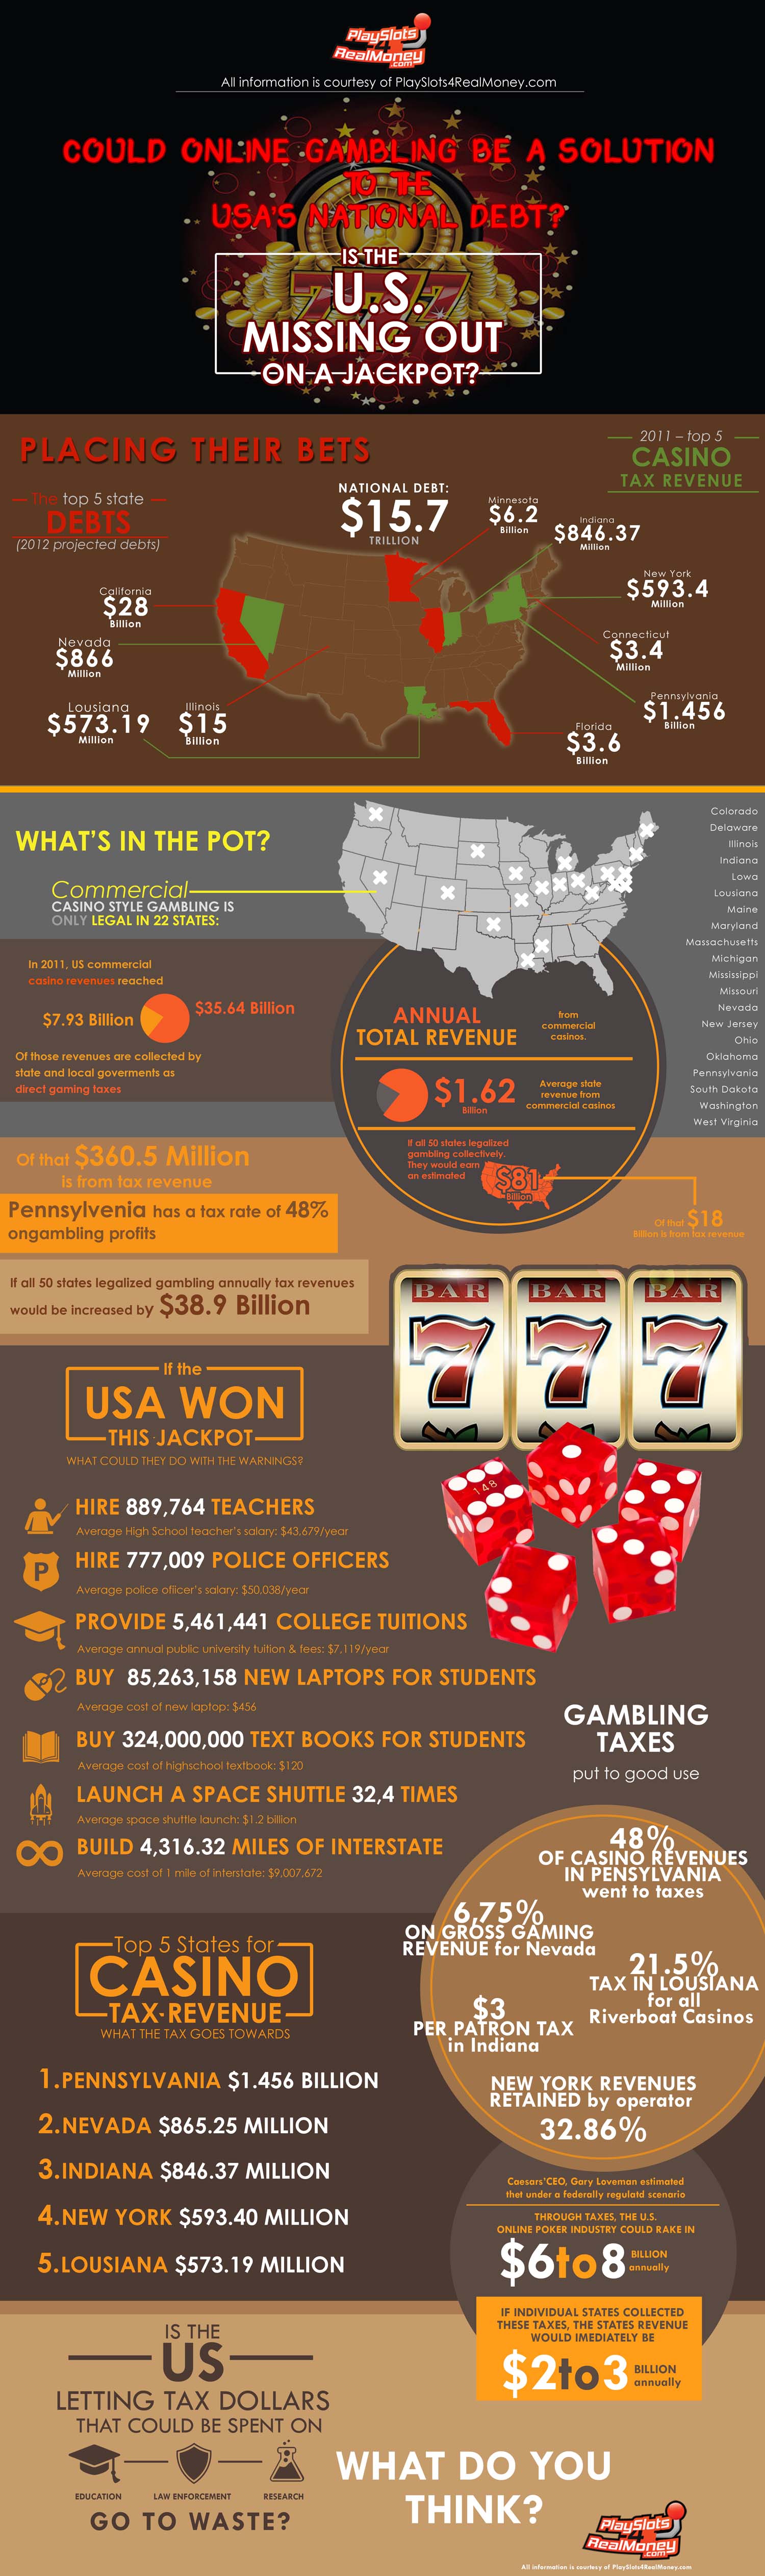 Can Online Gambling Solve U.S. Debt Issues?